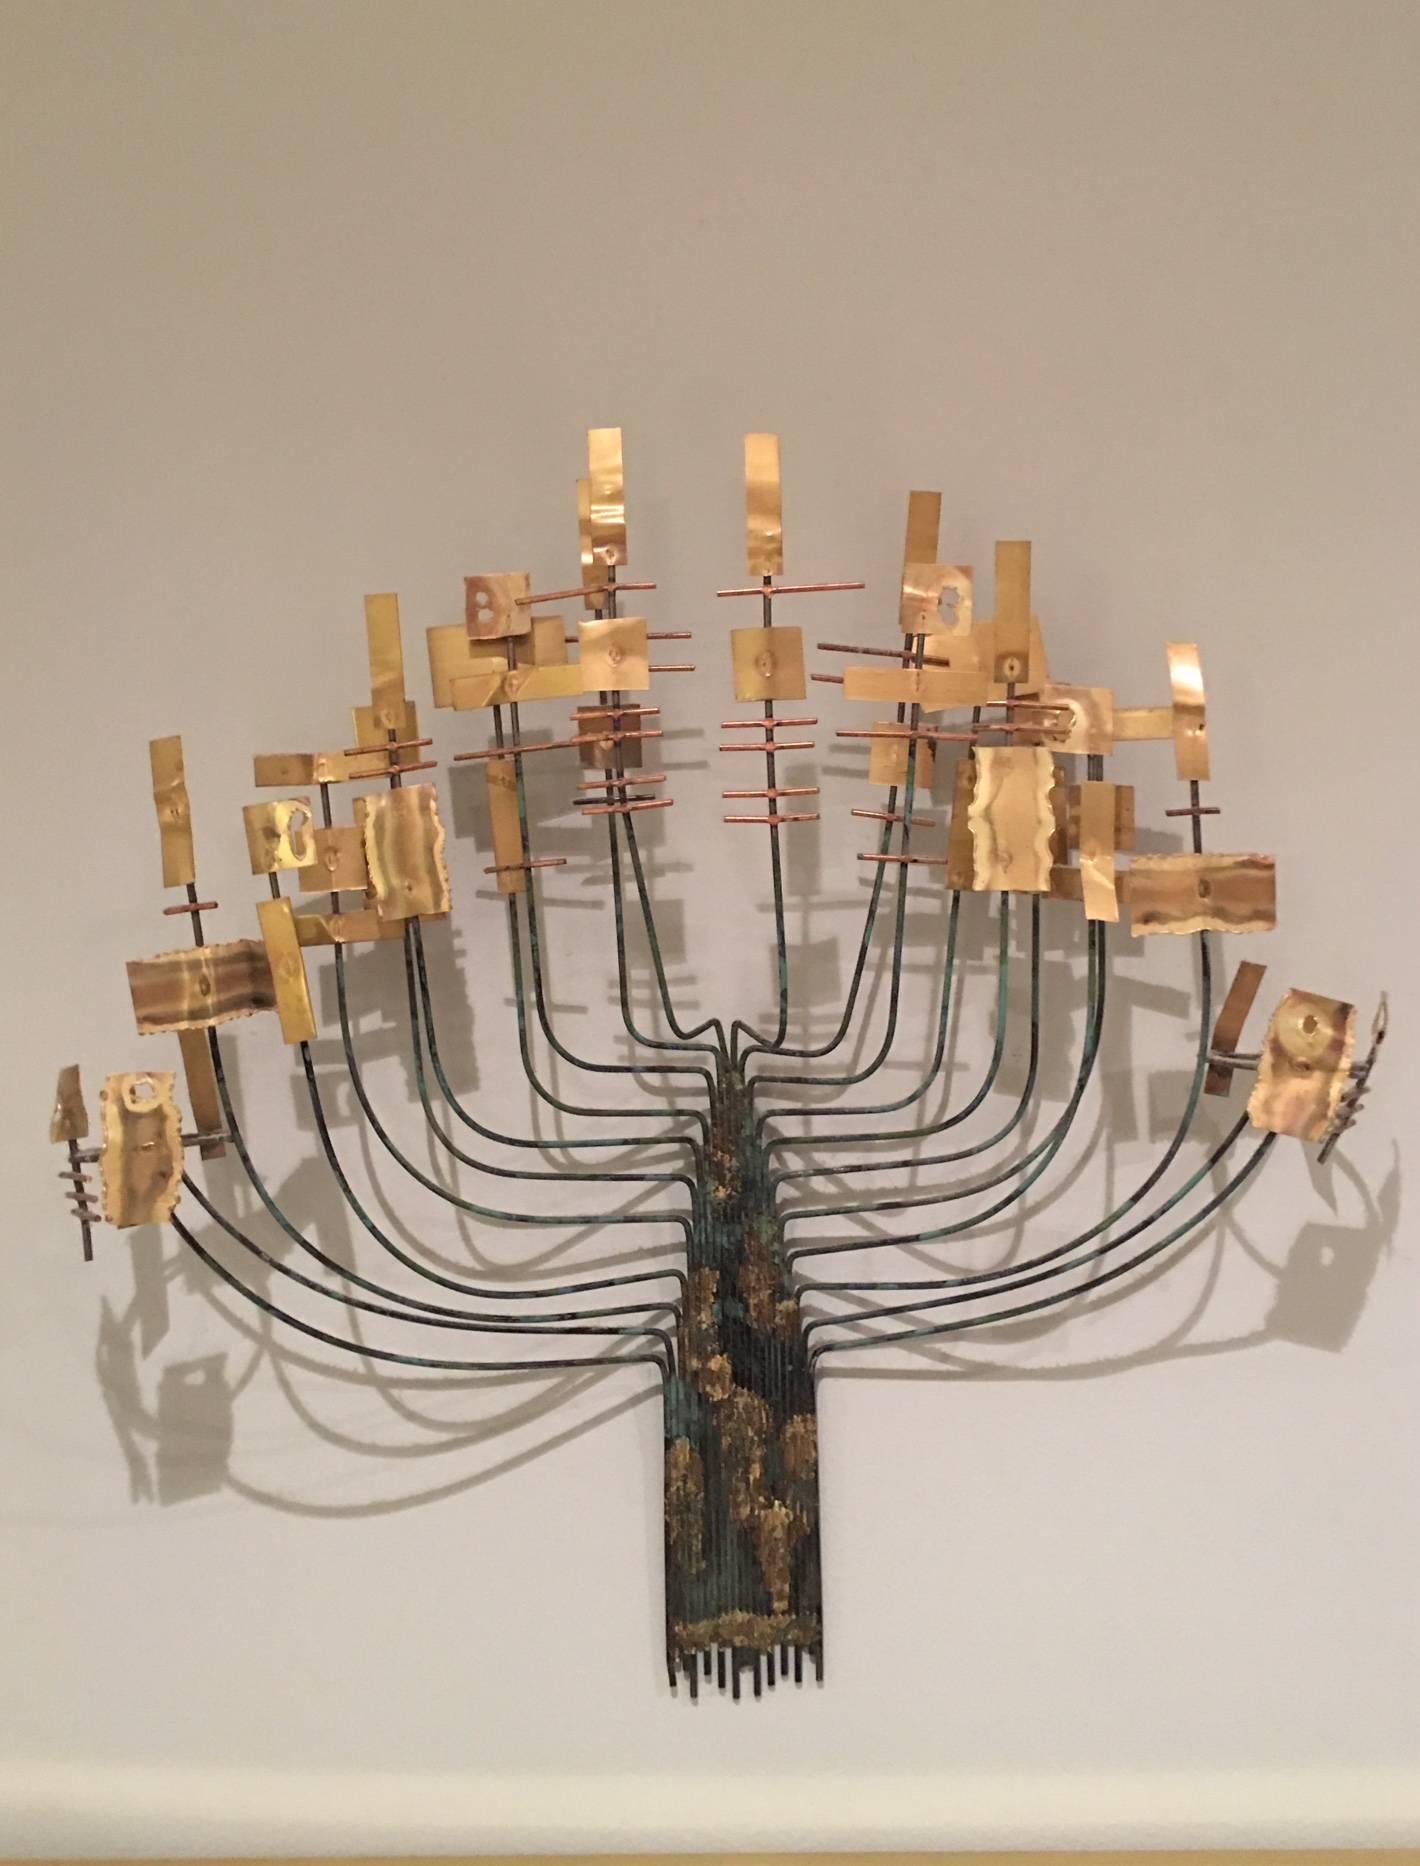 This lovely wall sculpture is in the manner of Curtis Jere, but is unsigned. It is crafted of brass and metal with tones of gold and Verdigris. Reminiscent of a menorah, it is the perfect small accent piece in a photo grouping or above a small